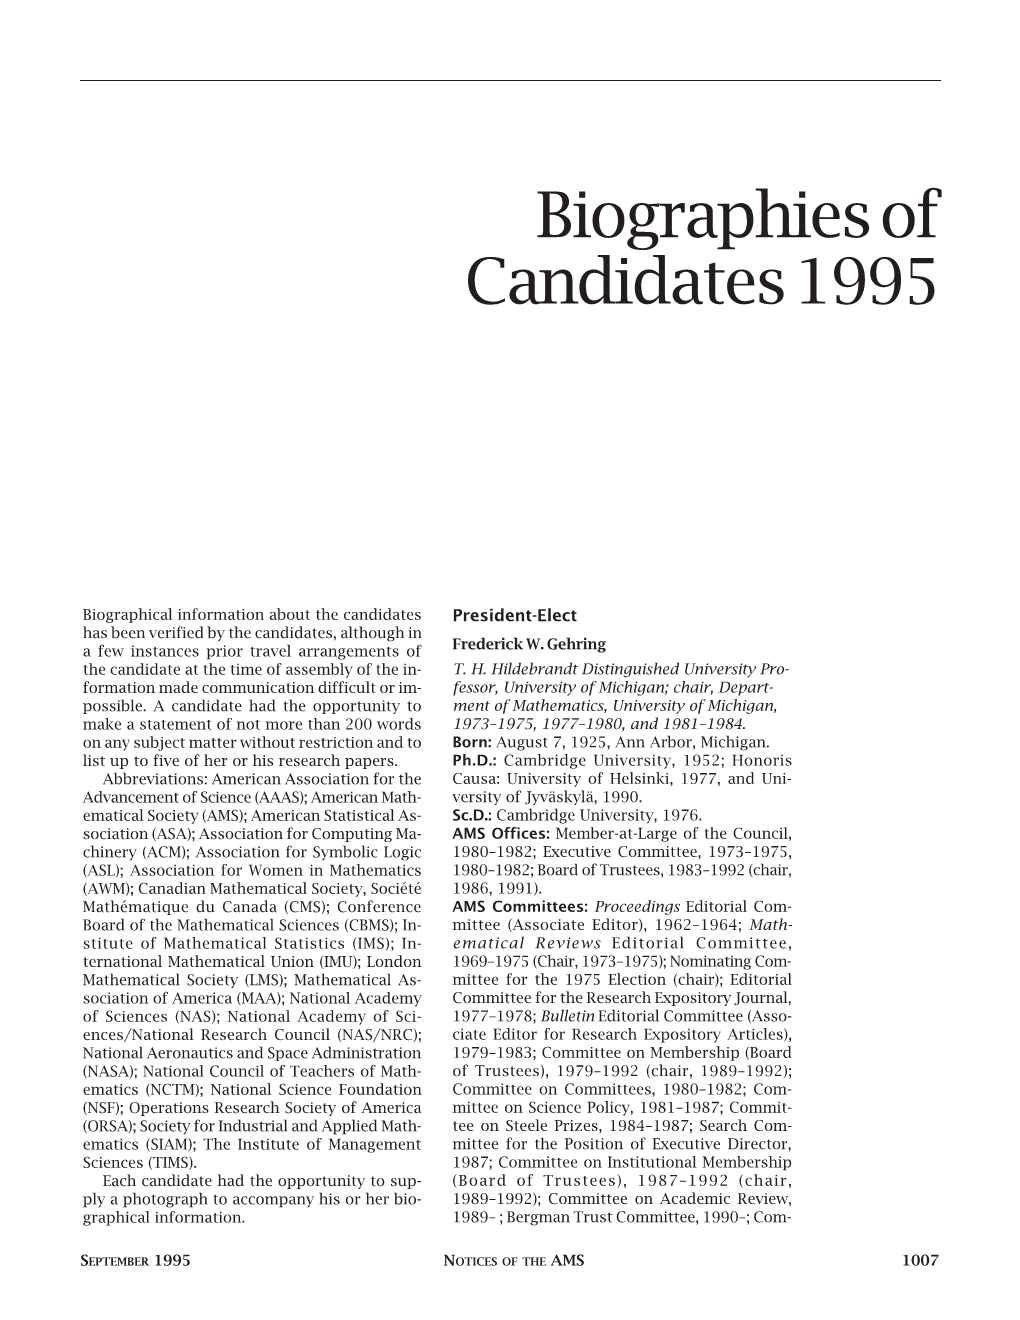 Biographies of Candidates 1995